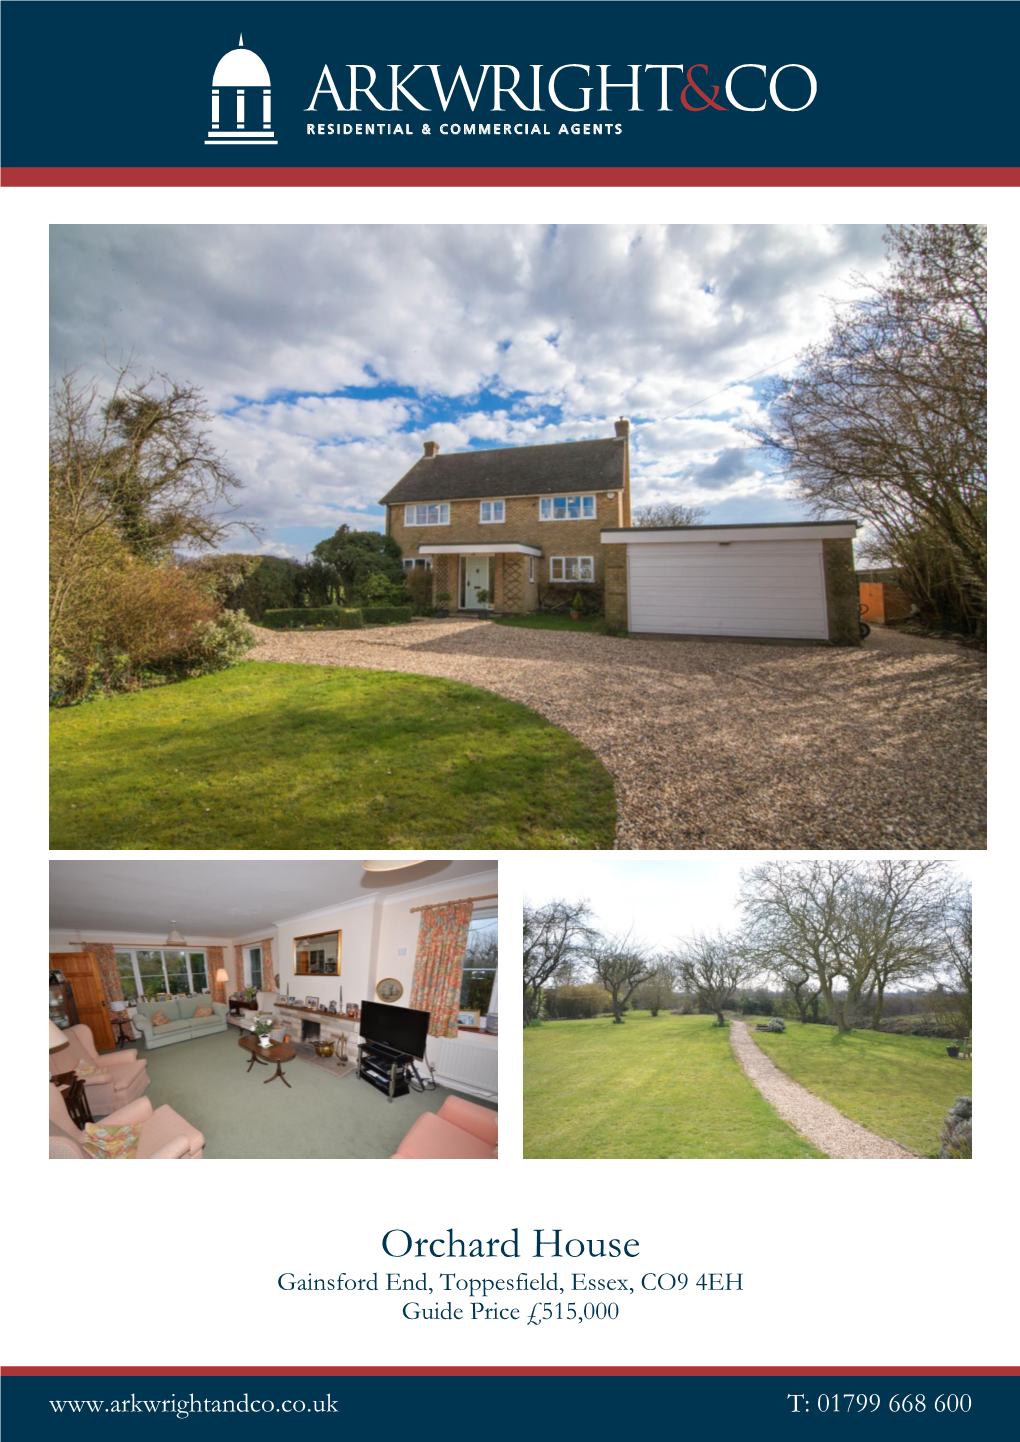 Orchard House Gainsford End, Toppesfield, Essex, CO9 4EH Guide Price £515,000 T: 01799 668 600